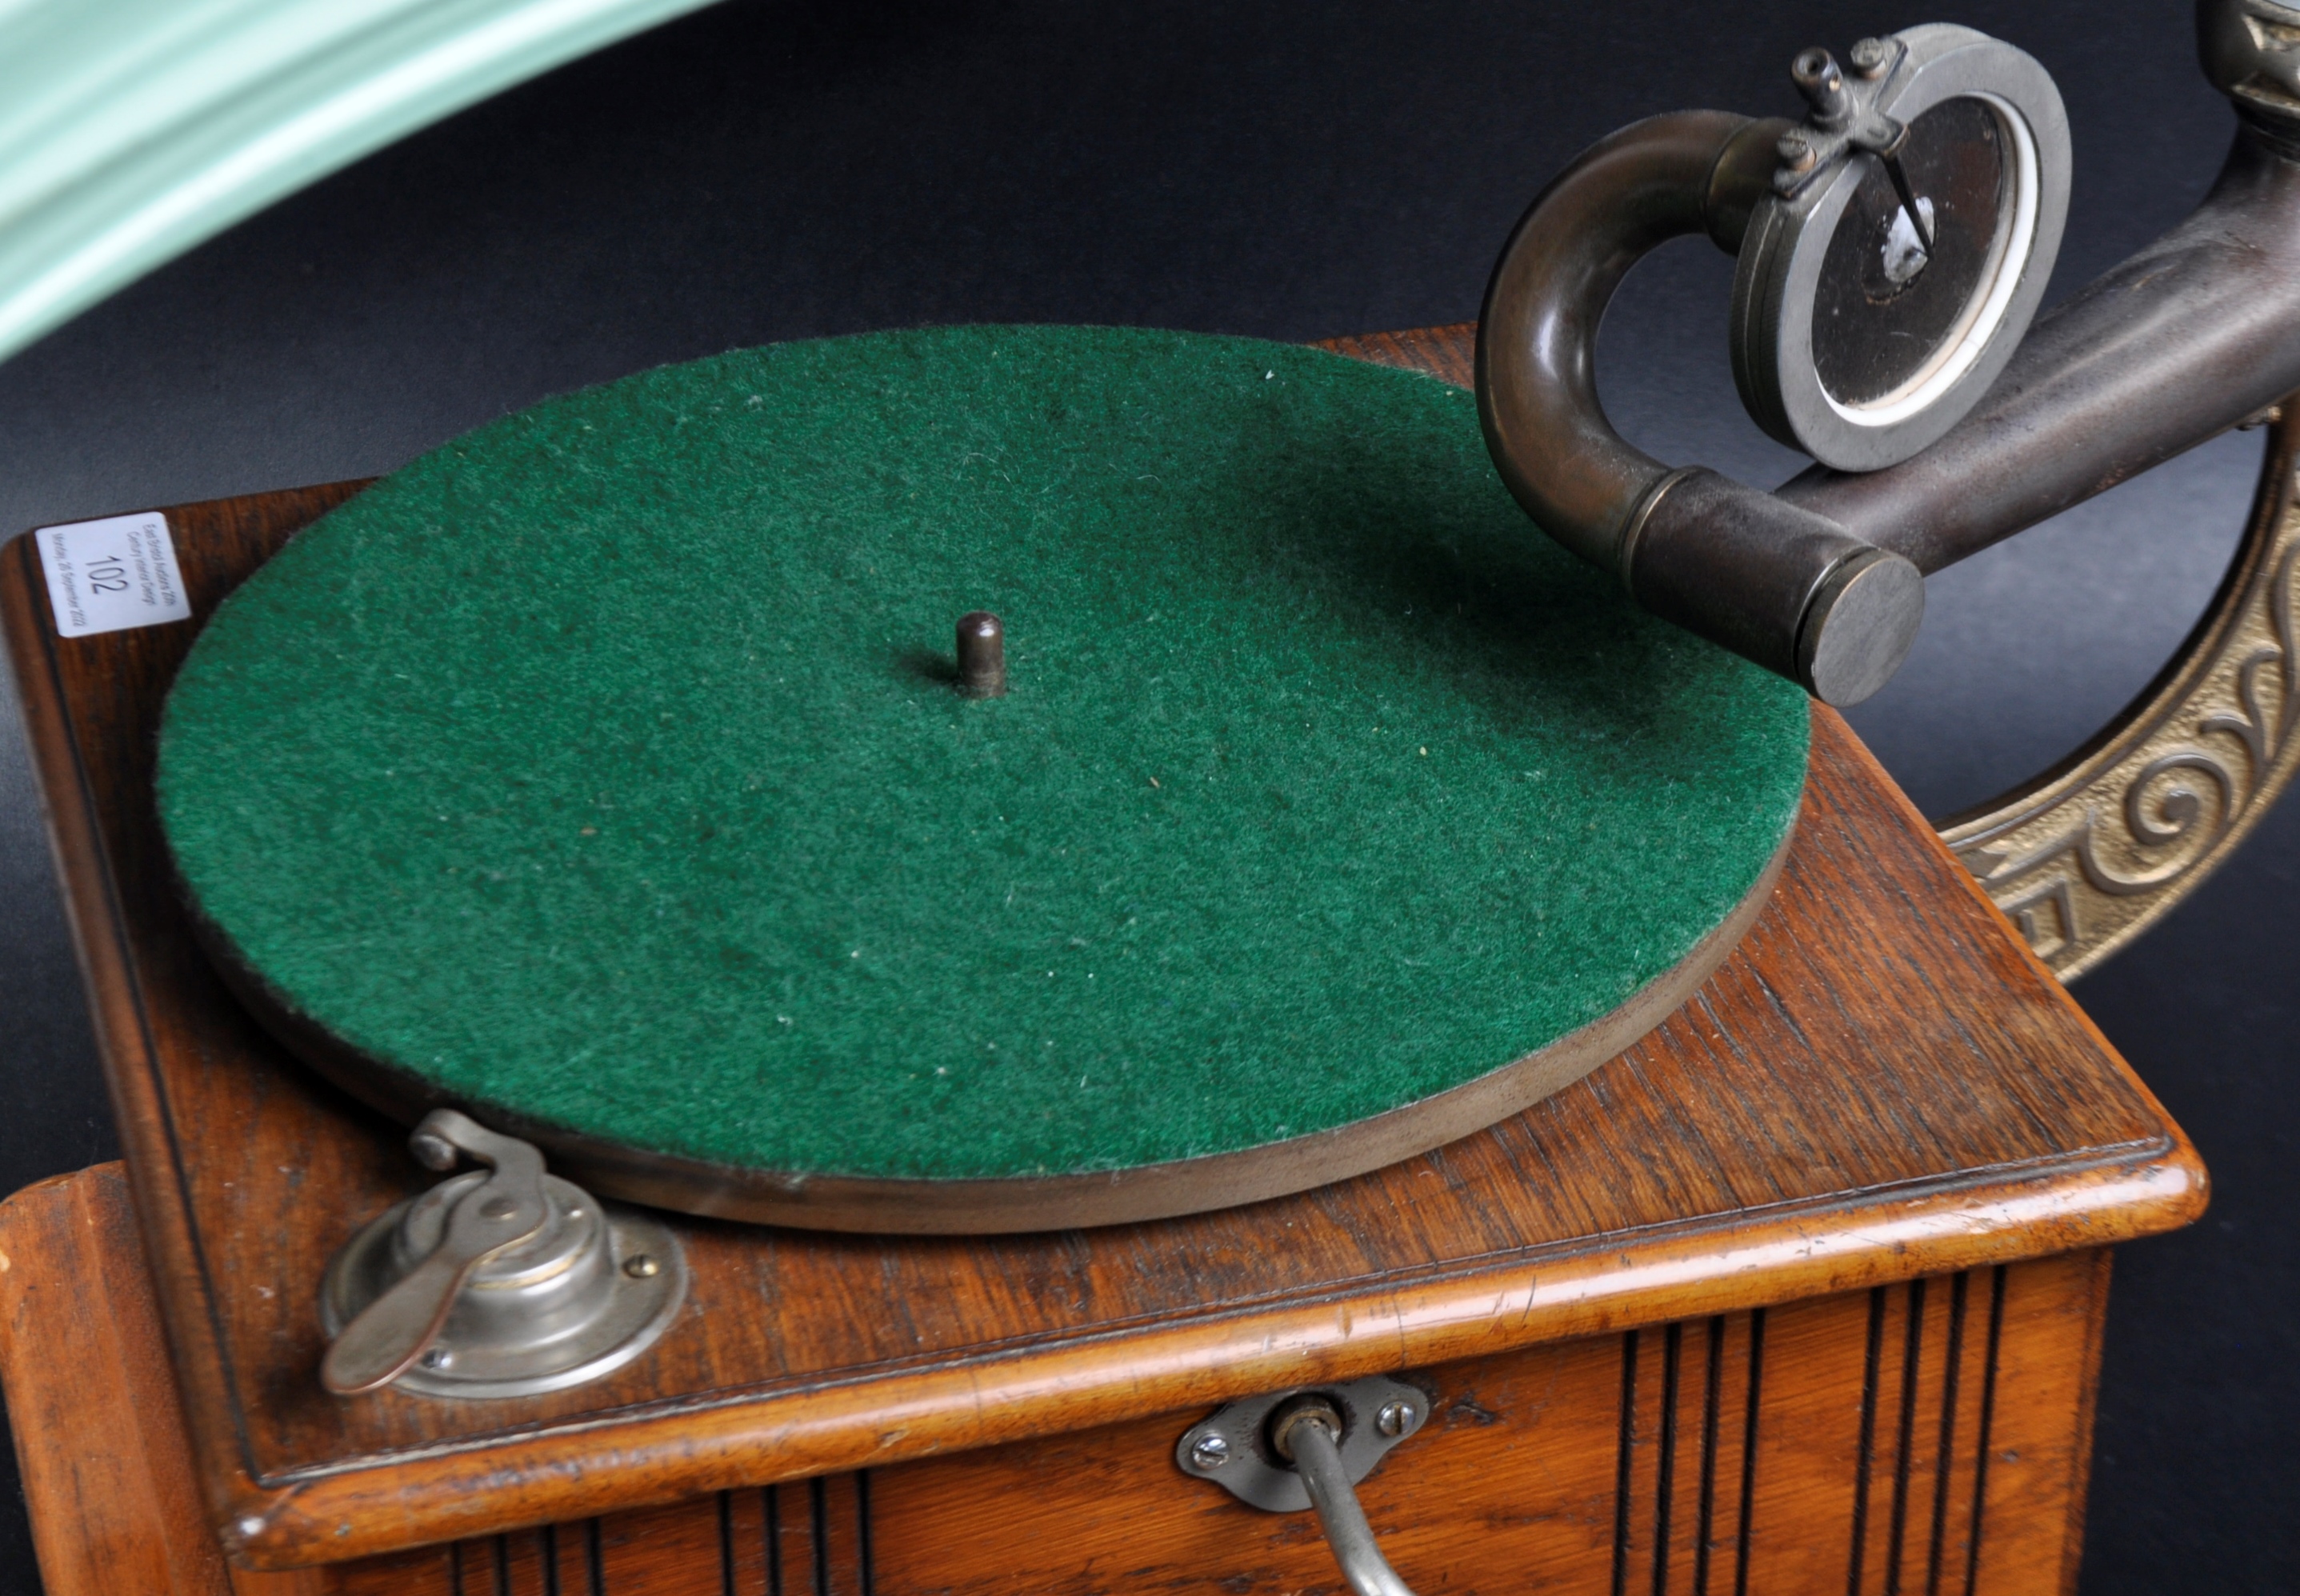 VINTAGE EARLY 20TH CENTURY GRAMOPHONE RECORD PLAYER - Image 5 of 7